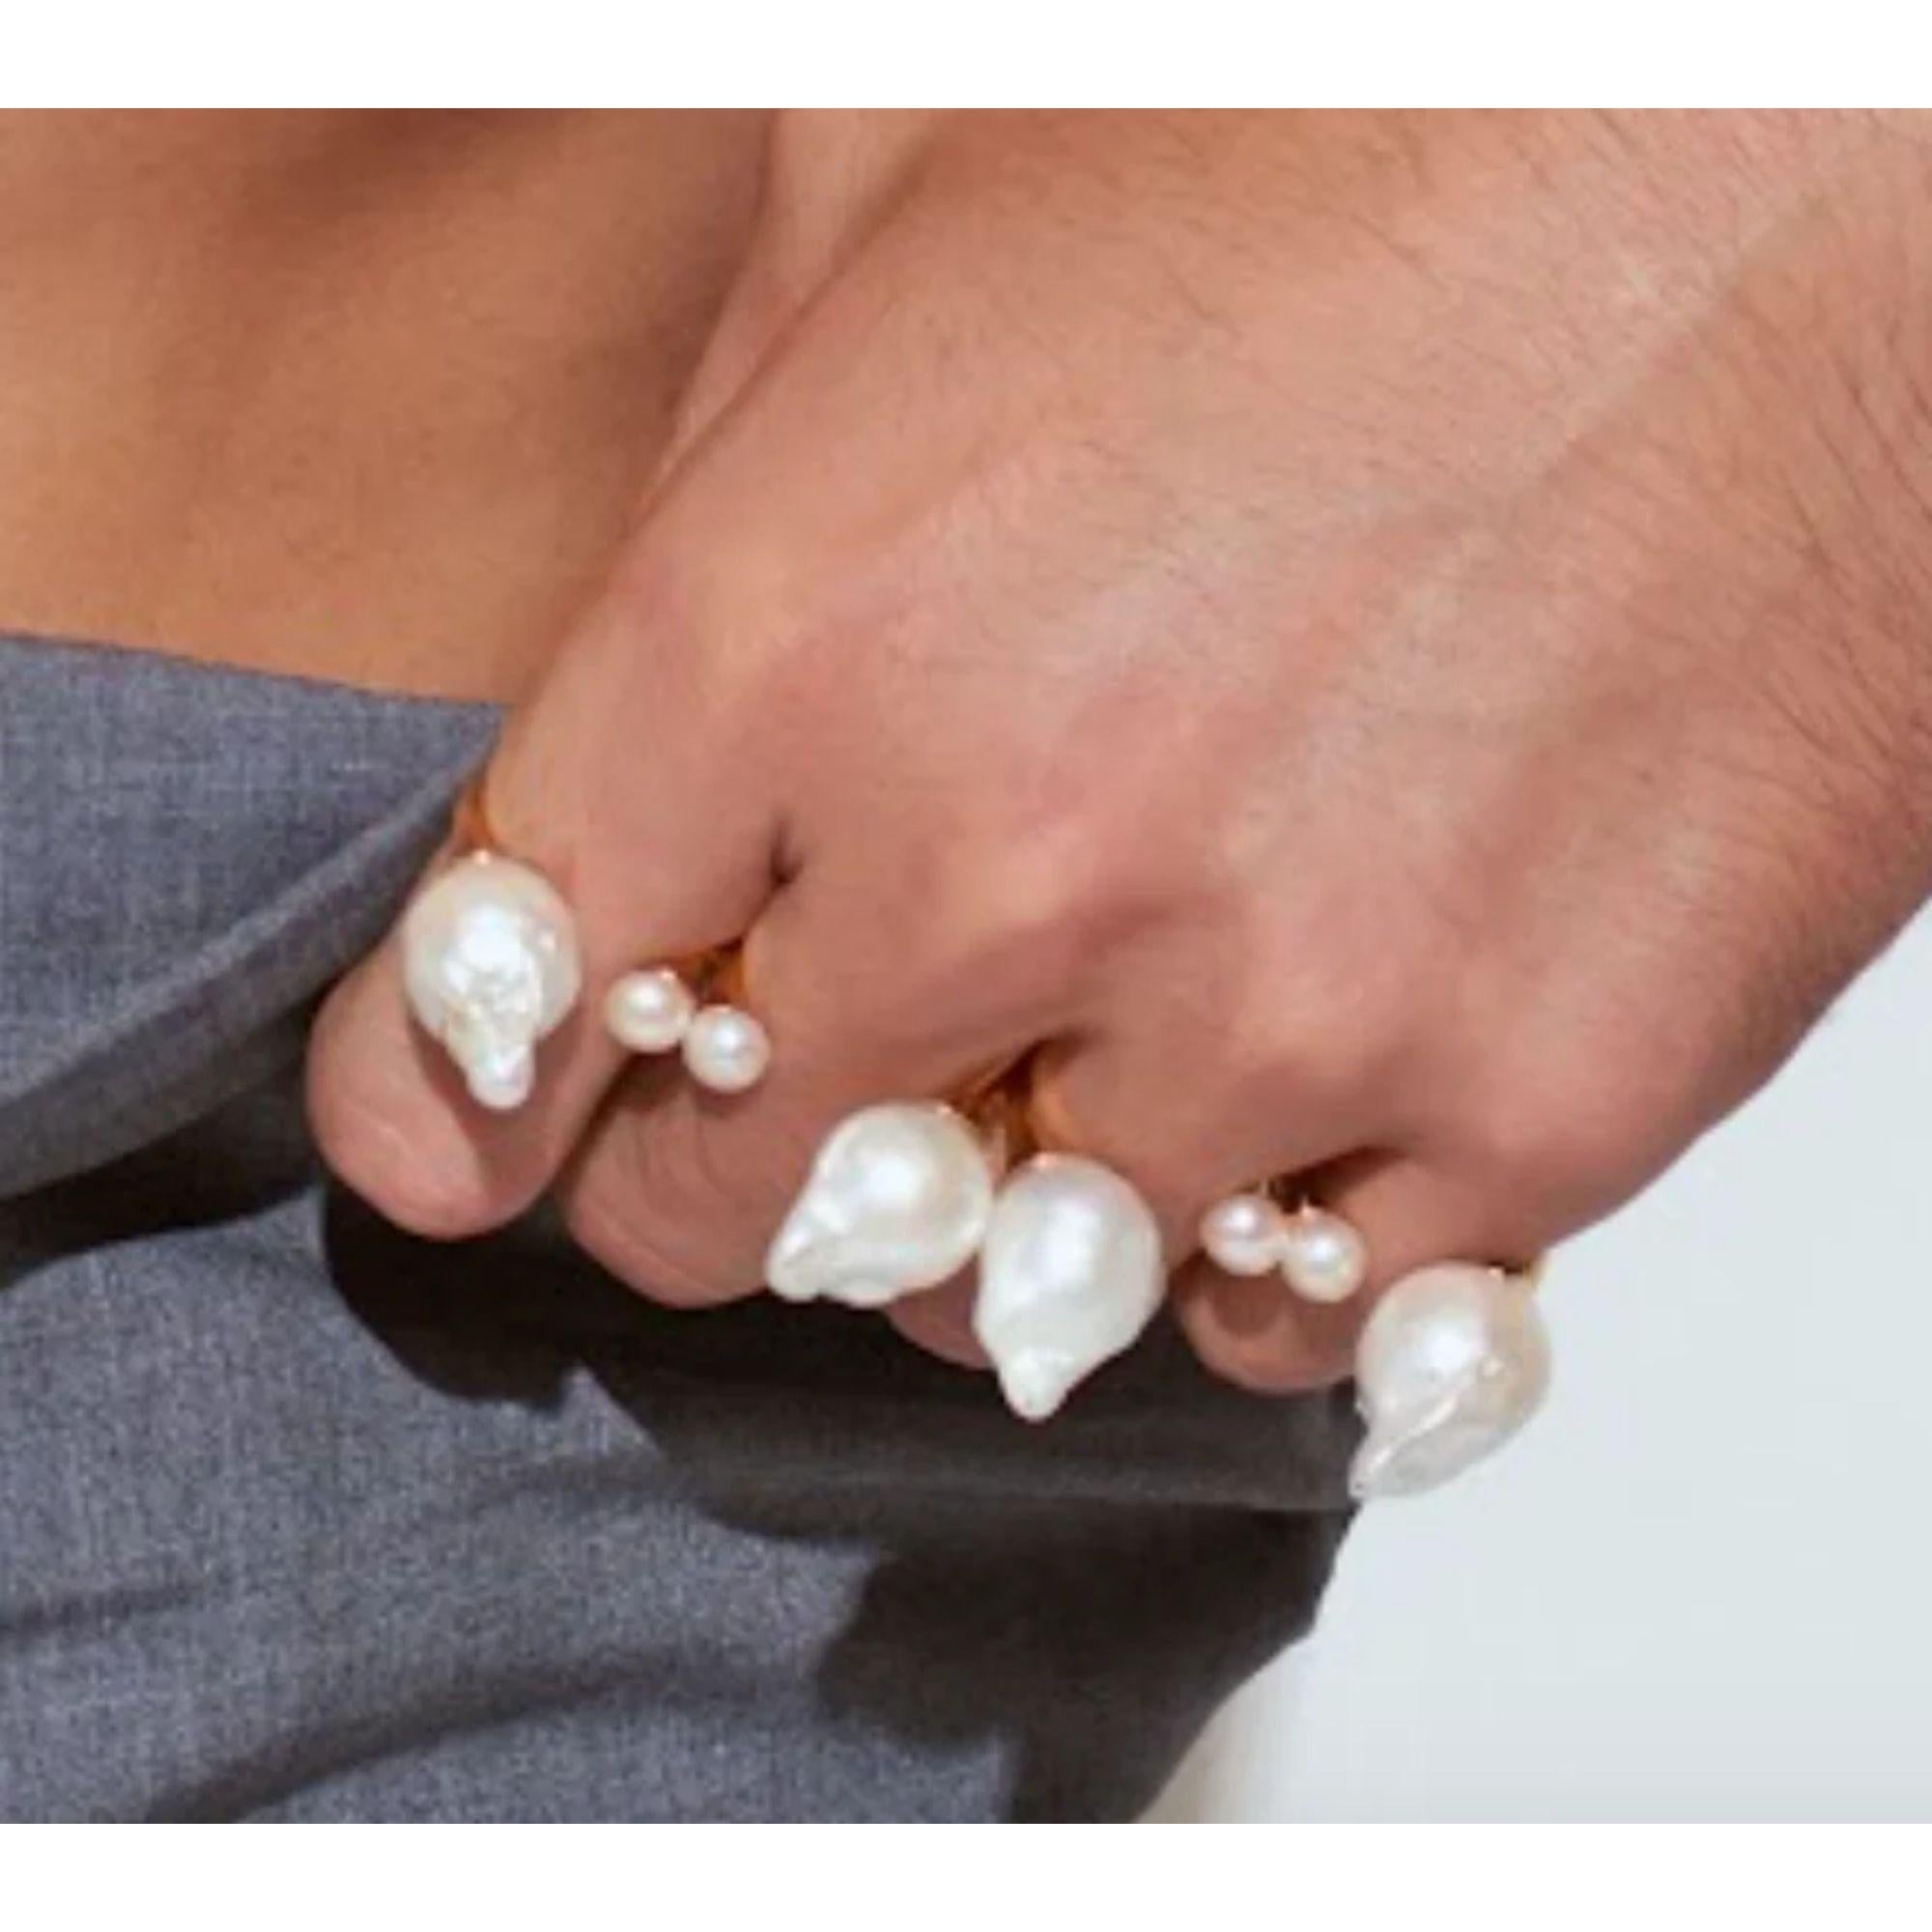 A luxurious twist on the armor knuckle rings. Baroque and freshwater pearls in an adjustable 4 Finger Ring. Match with our single ring for the thumb. Gold plated brass rings with freshwater and baroque pearls. Handmade in Los Angeles.

Additional